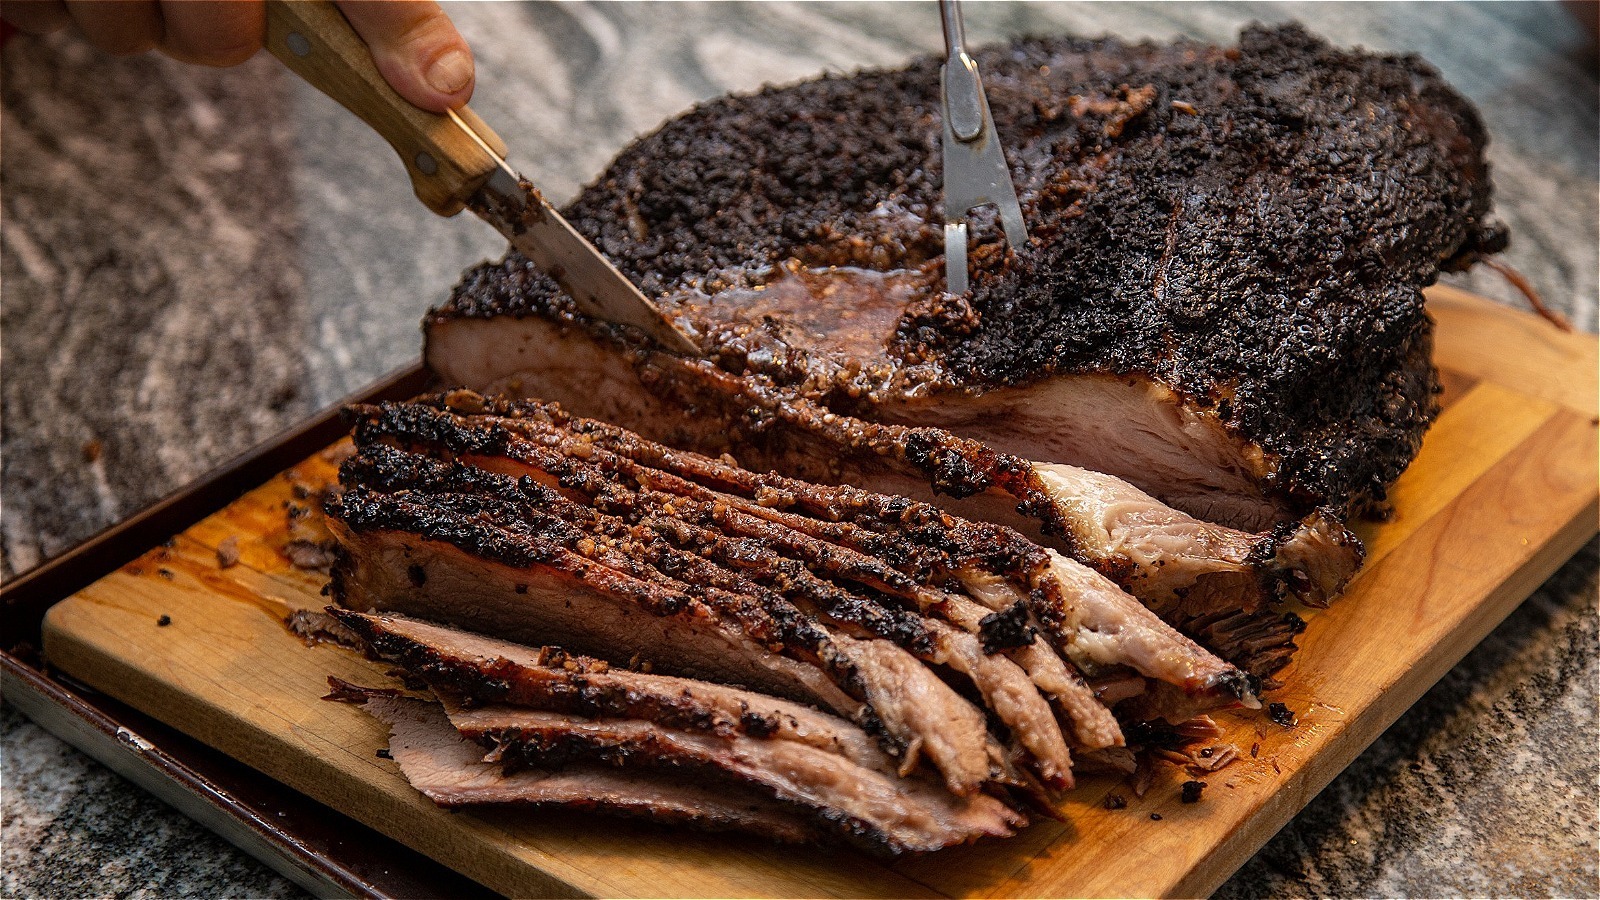 https://www.thedailymeal.com/img/gallery/for-the-perfect-smoked-meat-pay-attention-to-the-type-of-smoke/l-intro-1669127341.jpg